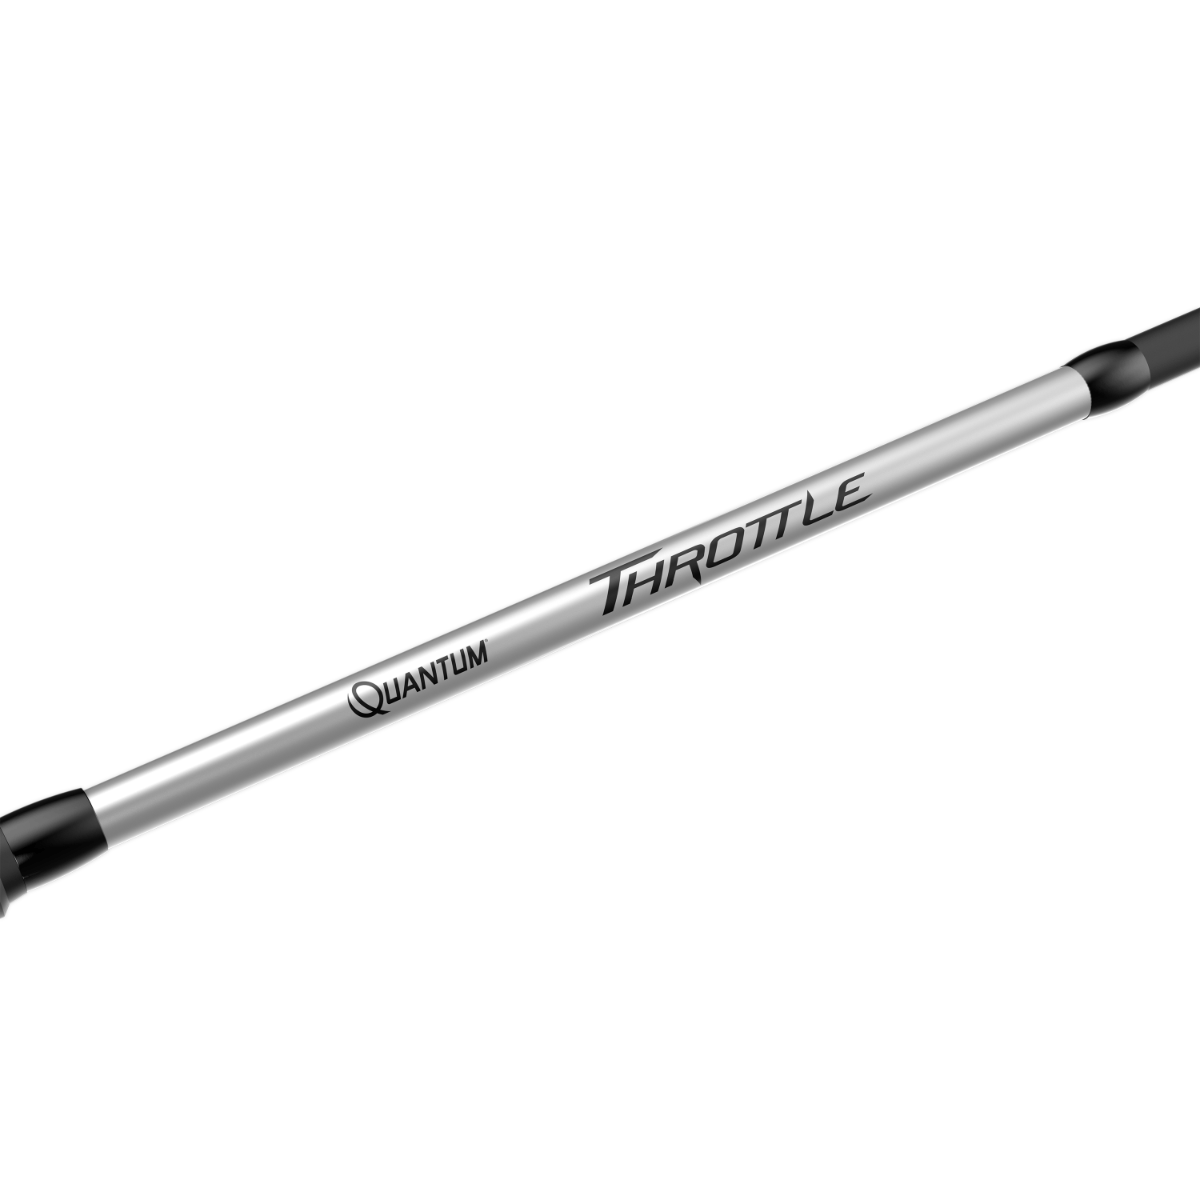 Quantum Throttle Spinning Rod and Reel Combo 6'6 2 Piece